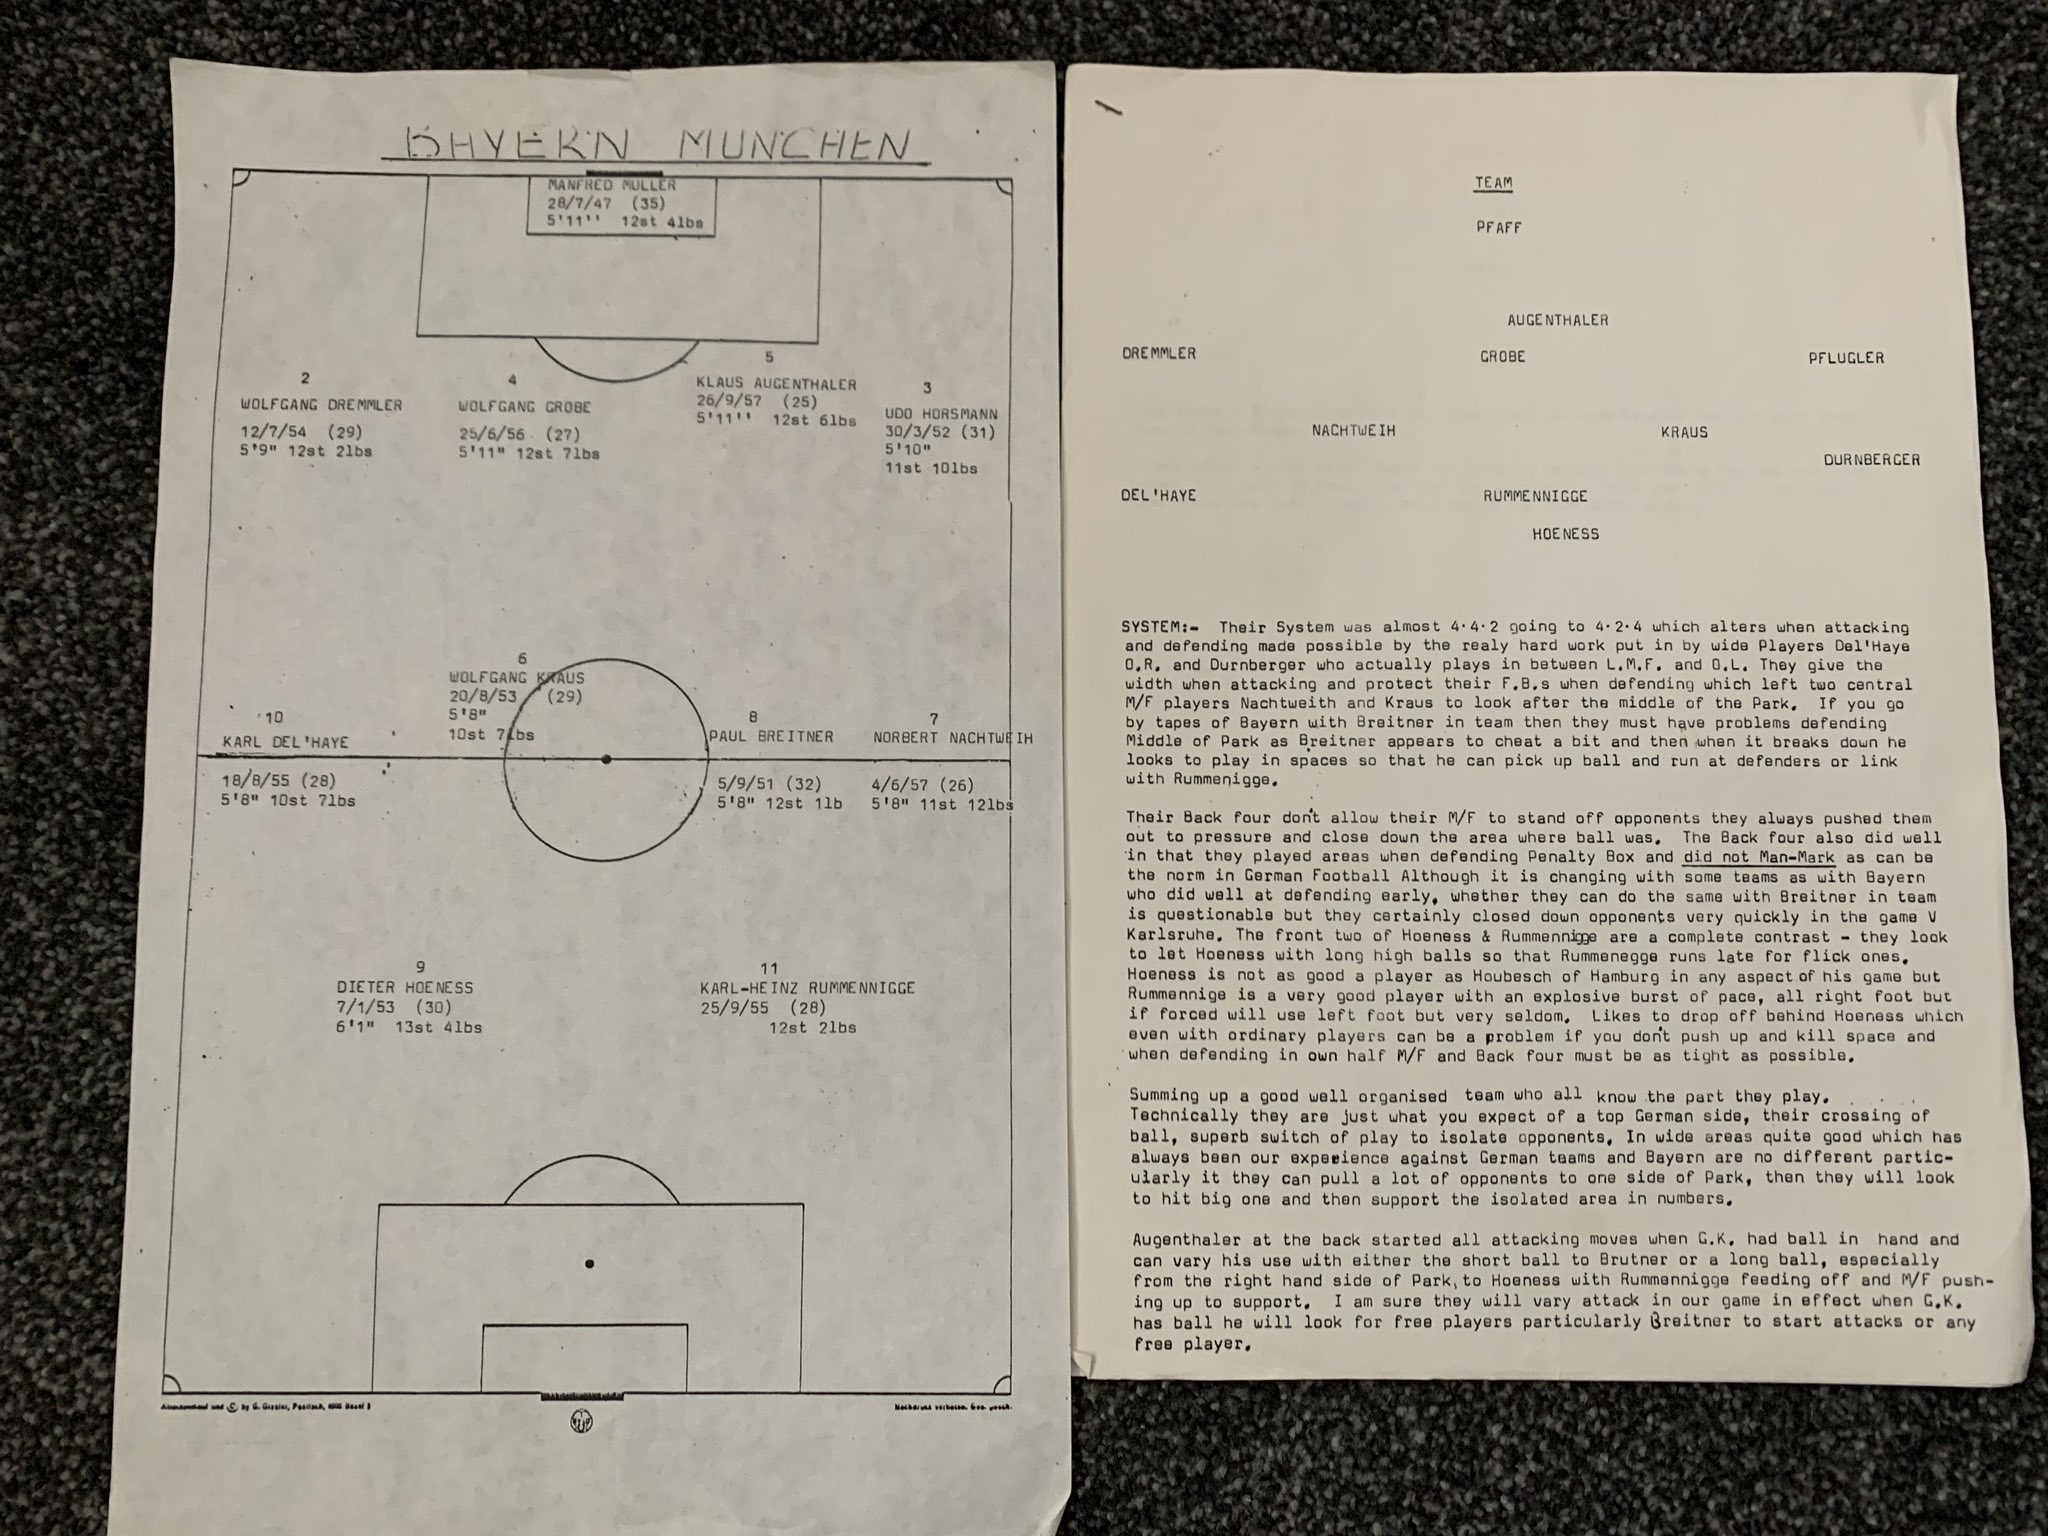 A system of play scouting report prepared by Archie Knox ahead of Aberdeen’s 3-2 aggregate win over Bayern Munich to reach the UEFA Cup Winners’ Cup Semi Finals - Courtesy of Neil Simpson from his personal collection.